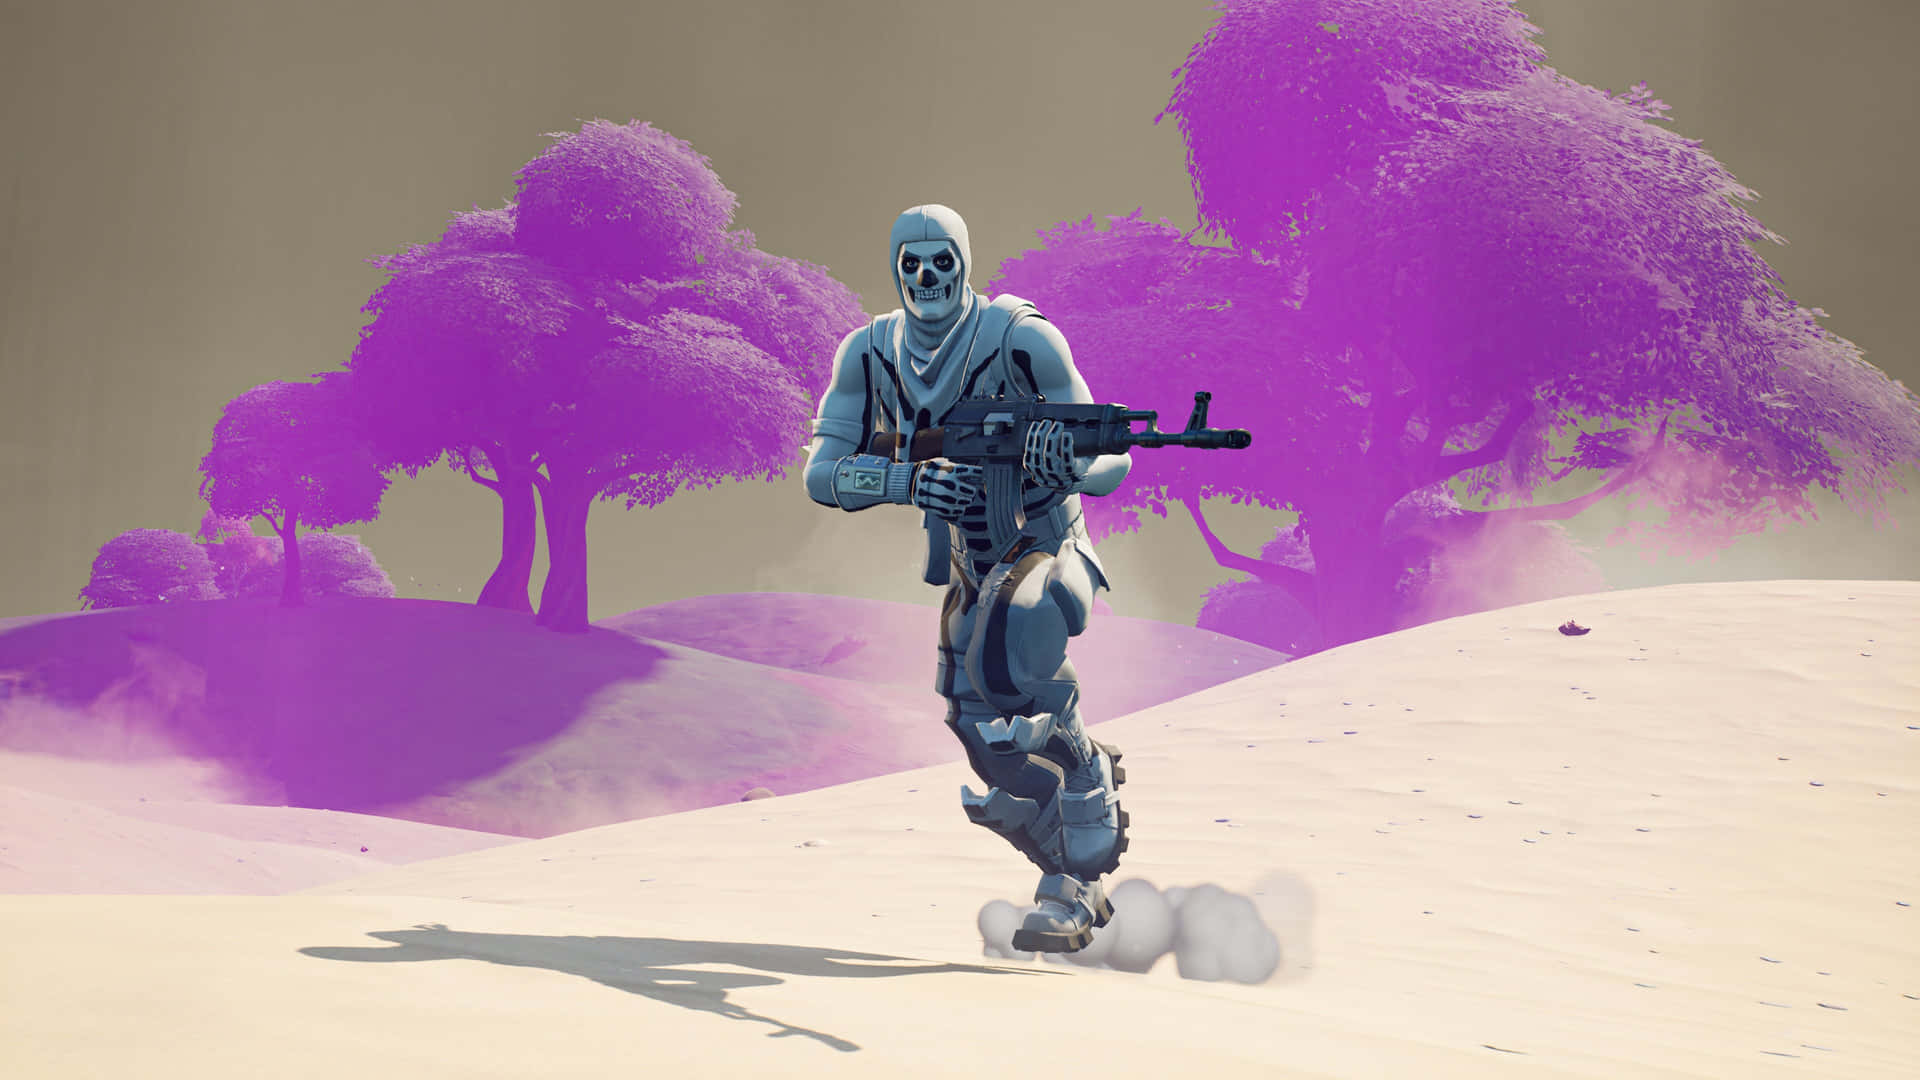 Fortnite - A Man In A Purple Suit Standing In The Desert Wallpaper